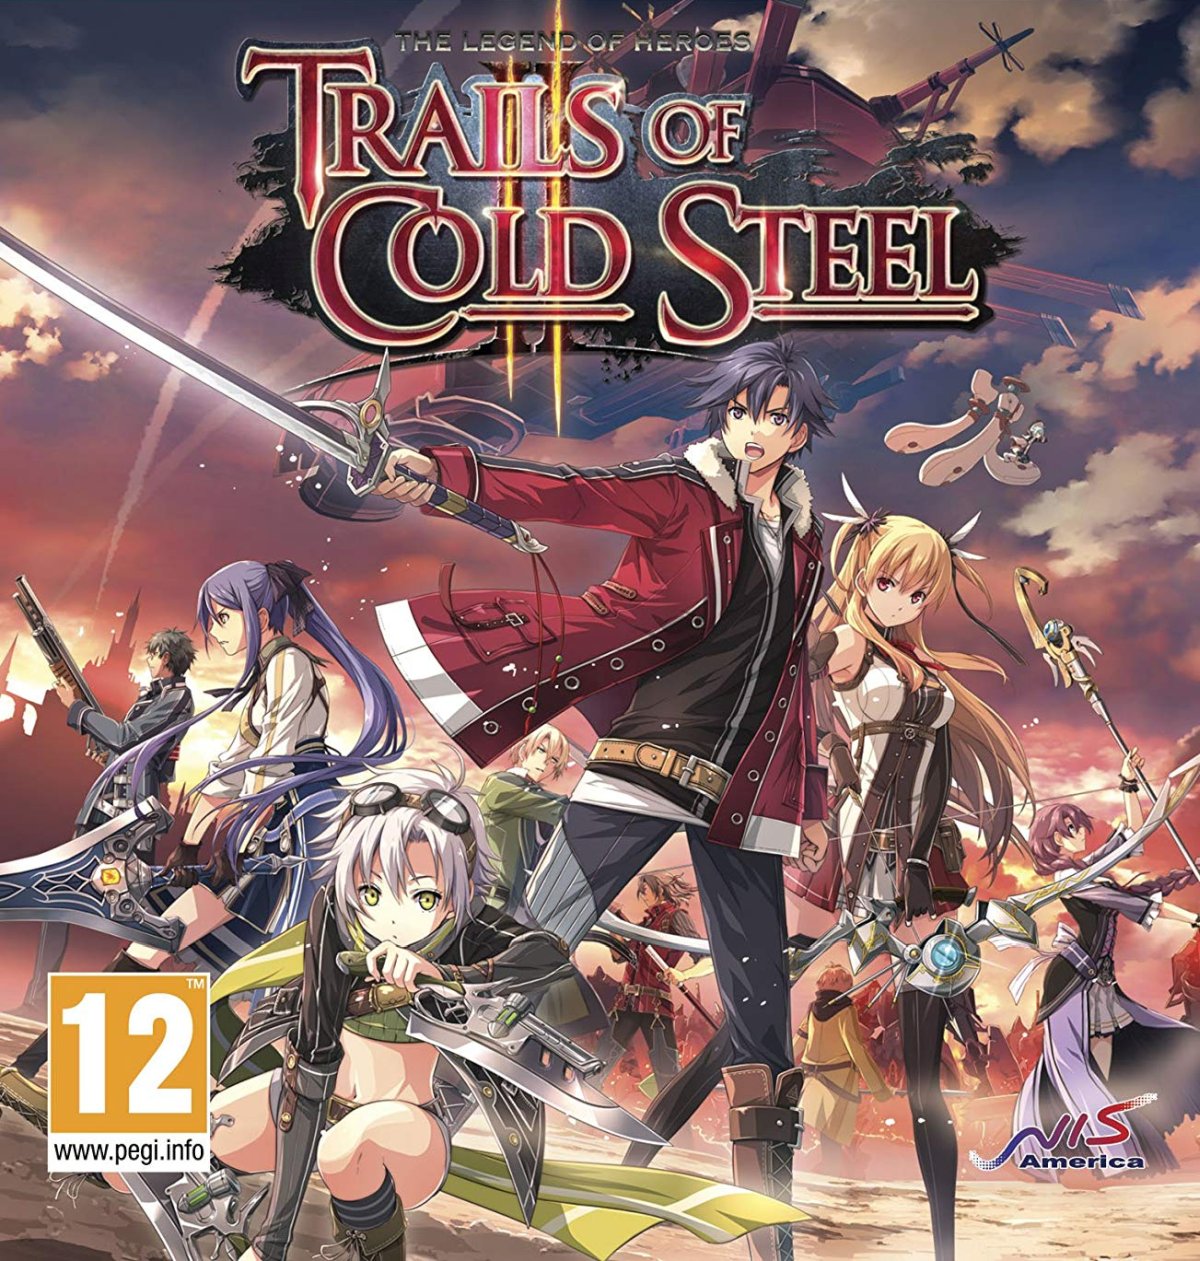 Capa do jogo The Legend of Heroes: Trails of Cold Steel II